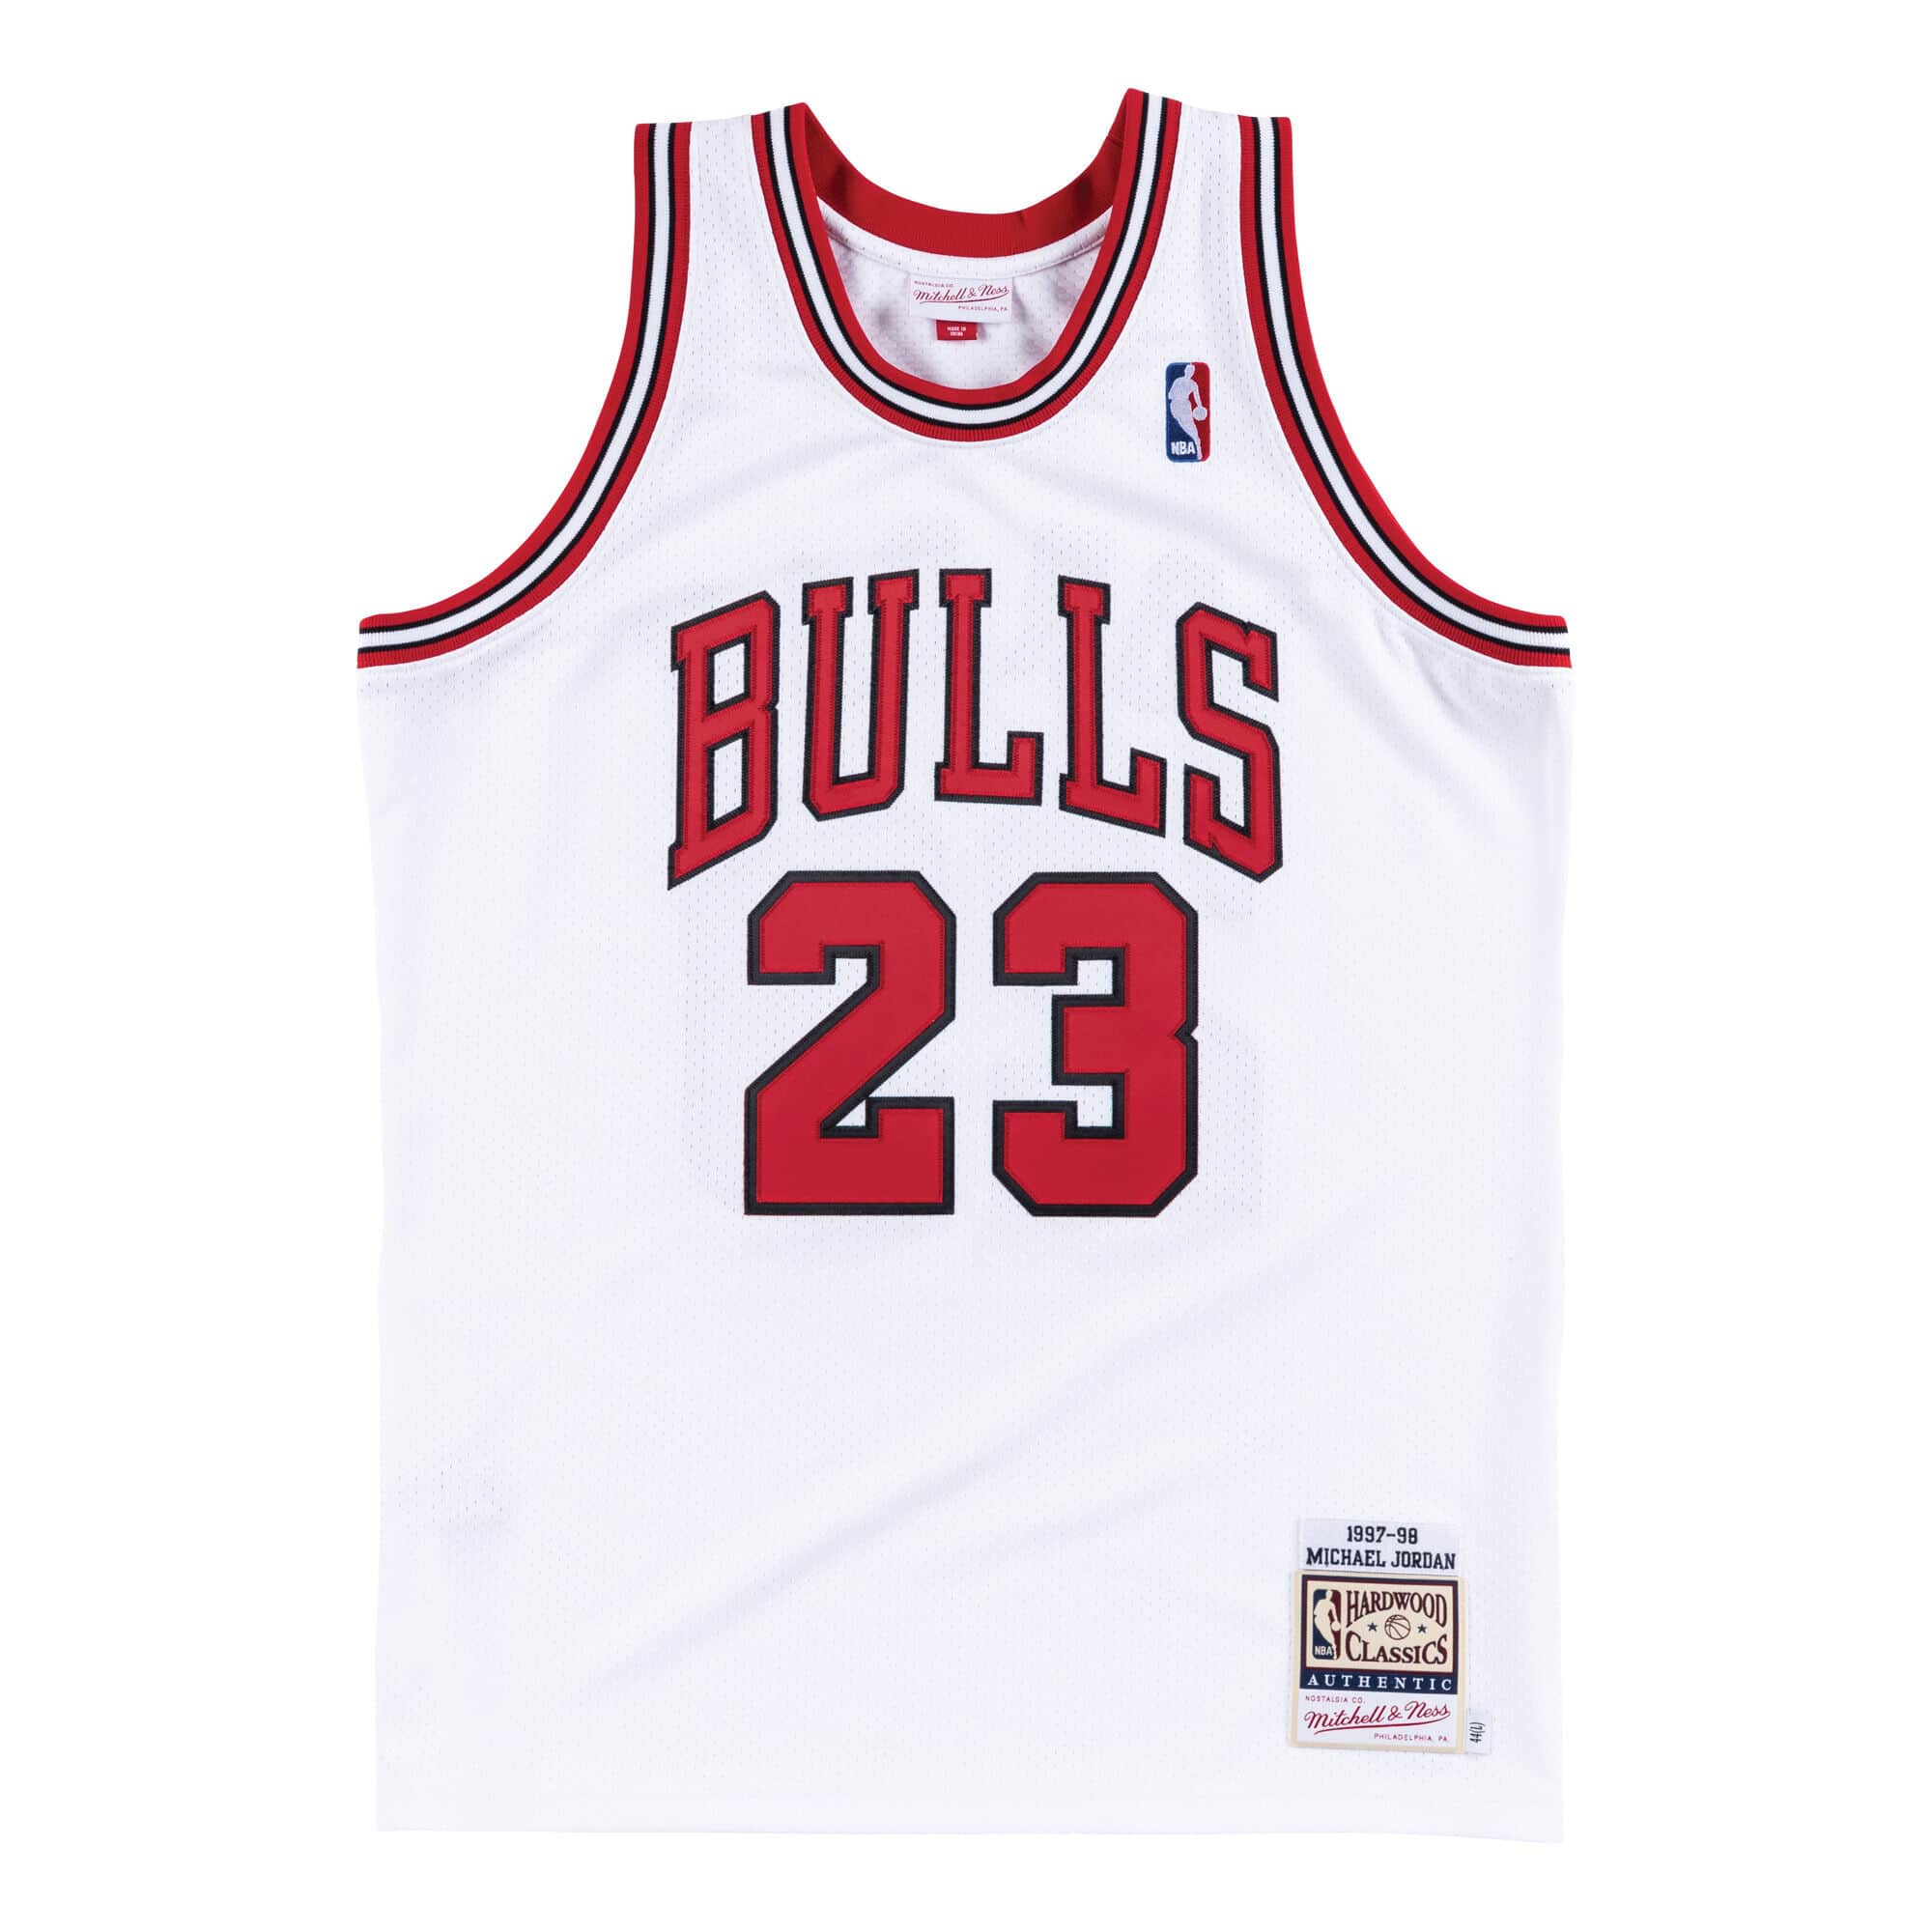 Authentic Chicago Bulls 1997 Shooting Shirt - Shop Mitchell & Ness